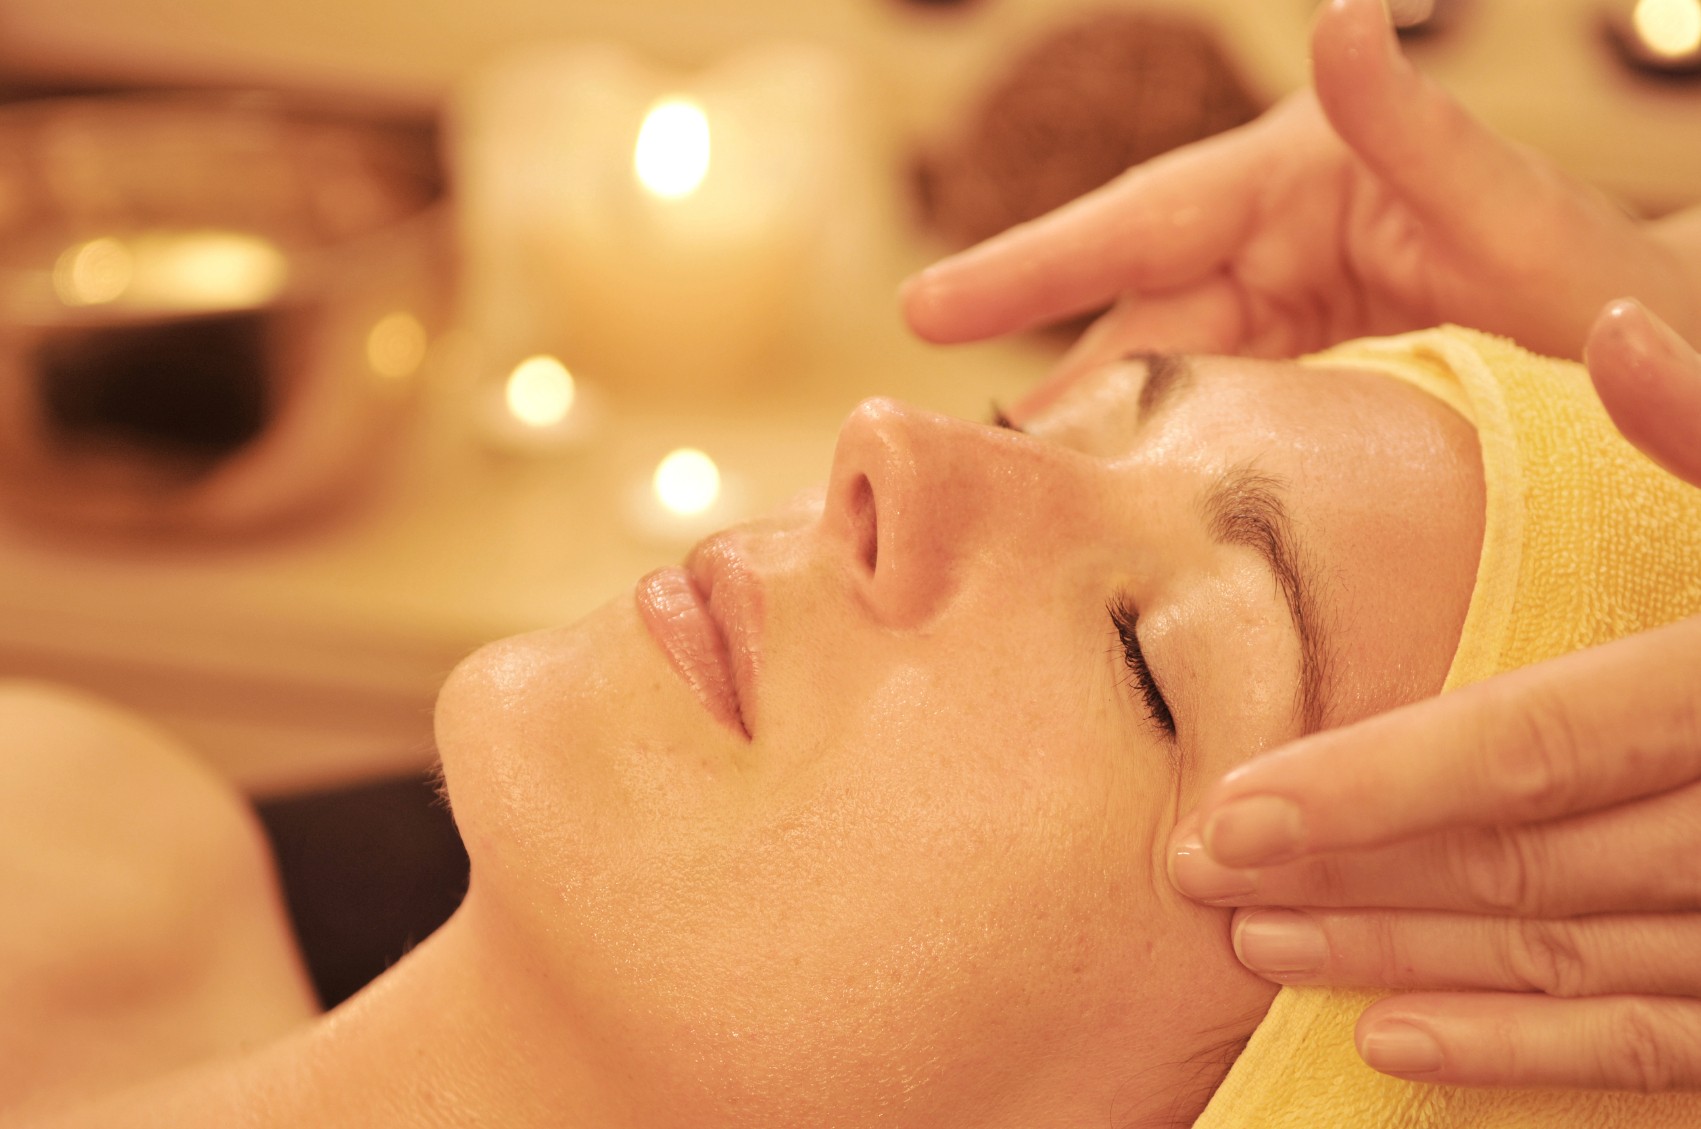 76% off, Rs 1750 only for Gold facial + Whitening skin polisher + Neck and shoulder massage + Whitening manicure + Whitening pedicure + Hand and feet polisher + Hand and feet massage + Hot oil head massage or Hair Cutting+ Threading (Upper Lips and Eye Brows) by Lady Gaga Salon & Spa Gulberg-III, Lahore.